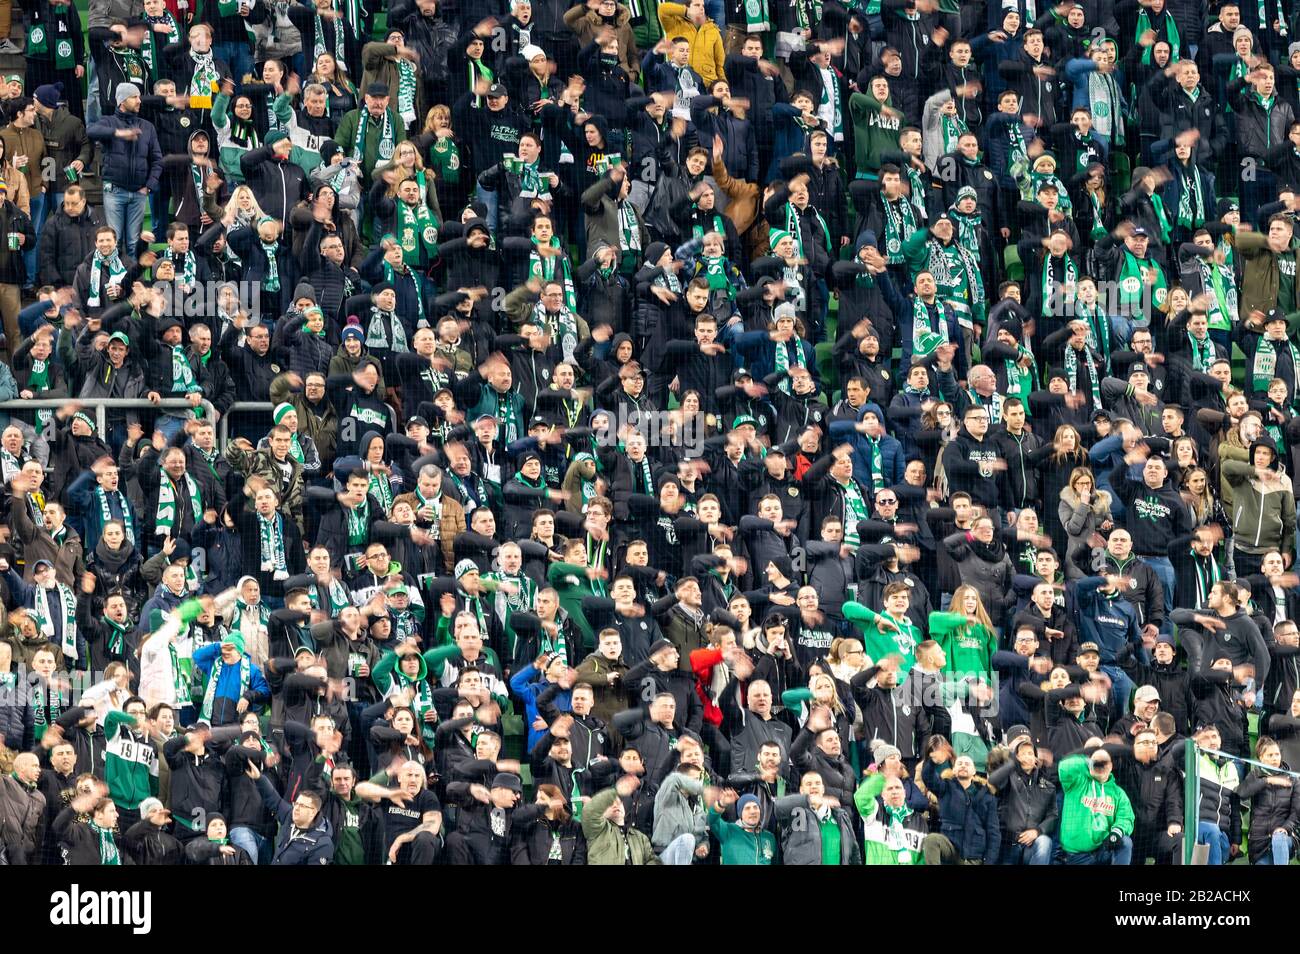 BUDAPEST, HUNGARY - FEBRUARY 29: Ultras of Ferencvarosi TC support their team during the Hungarian OTP Bank Liga match between Ferencvarosi TC and DVSC at Groupama Arena on February 29, 2020 in Budapest, Hungary. Stock Photo